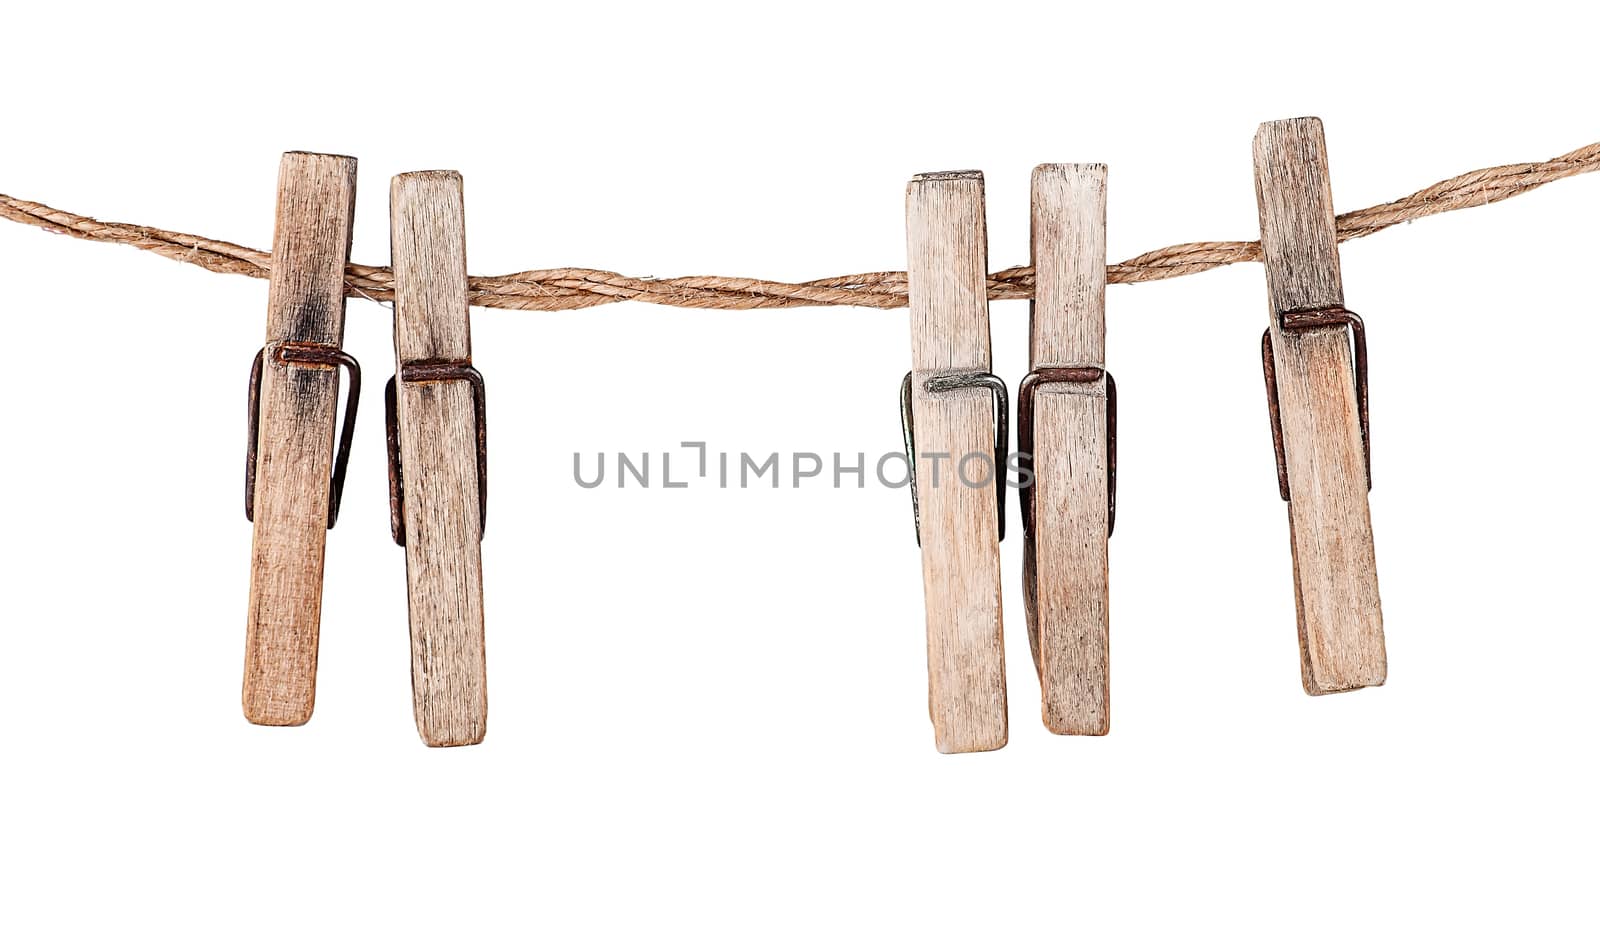 Five old clothespins on rope isolated on white background